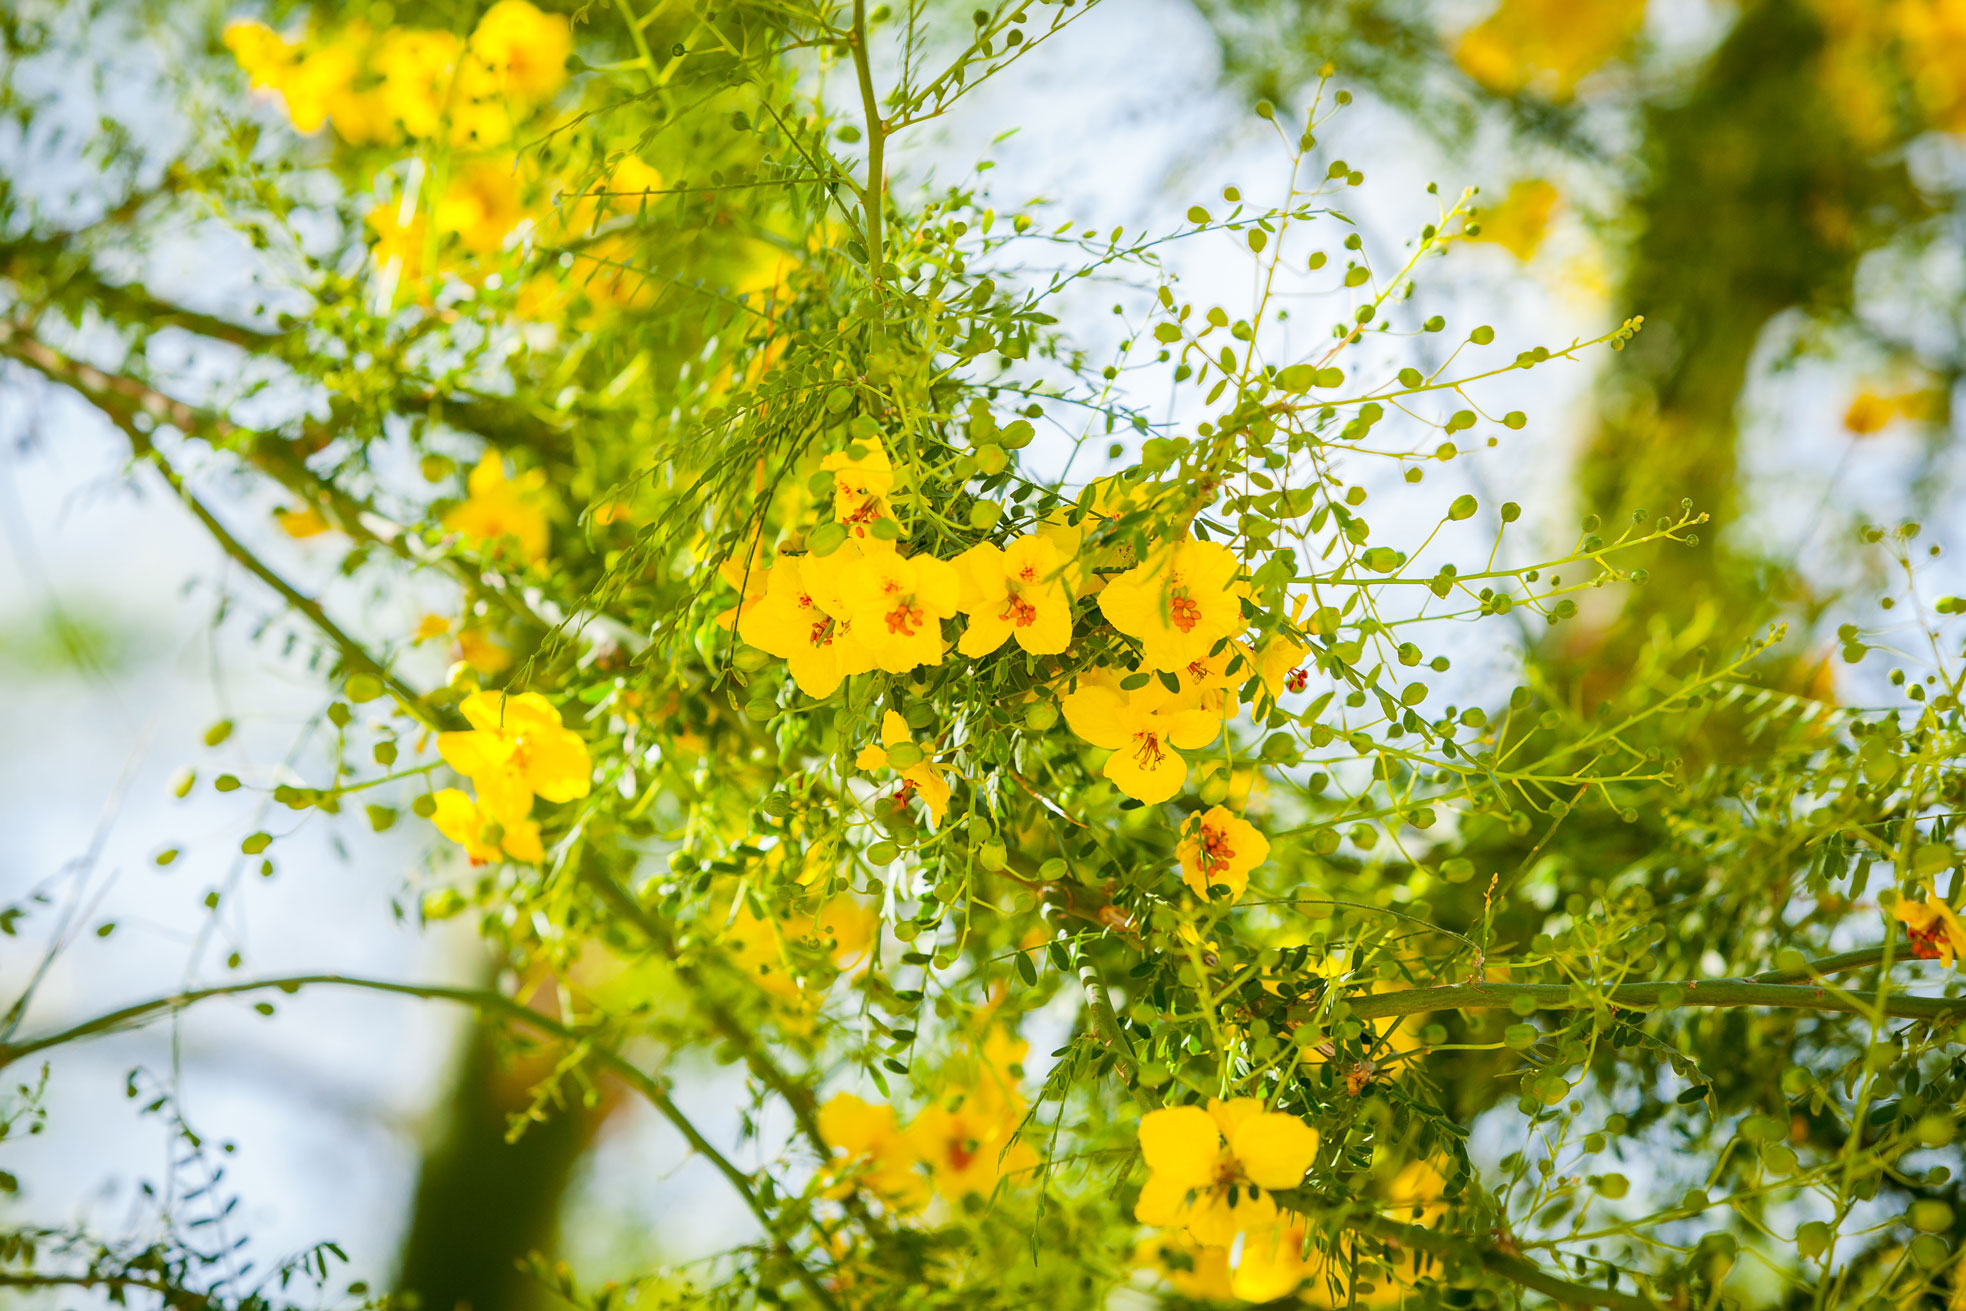 A close-up of the bright yellow blossoms of the Palo Verde tree.